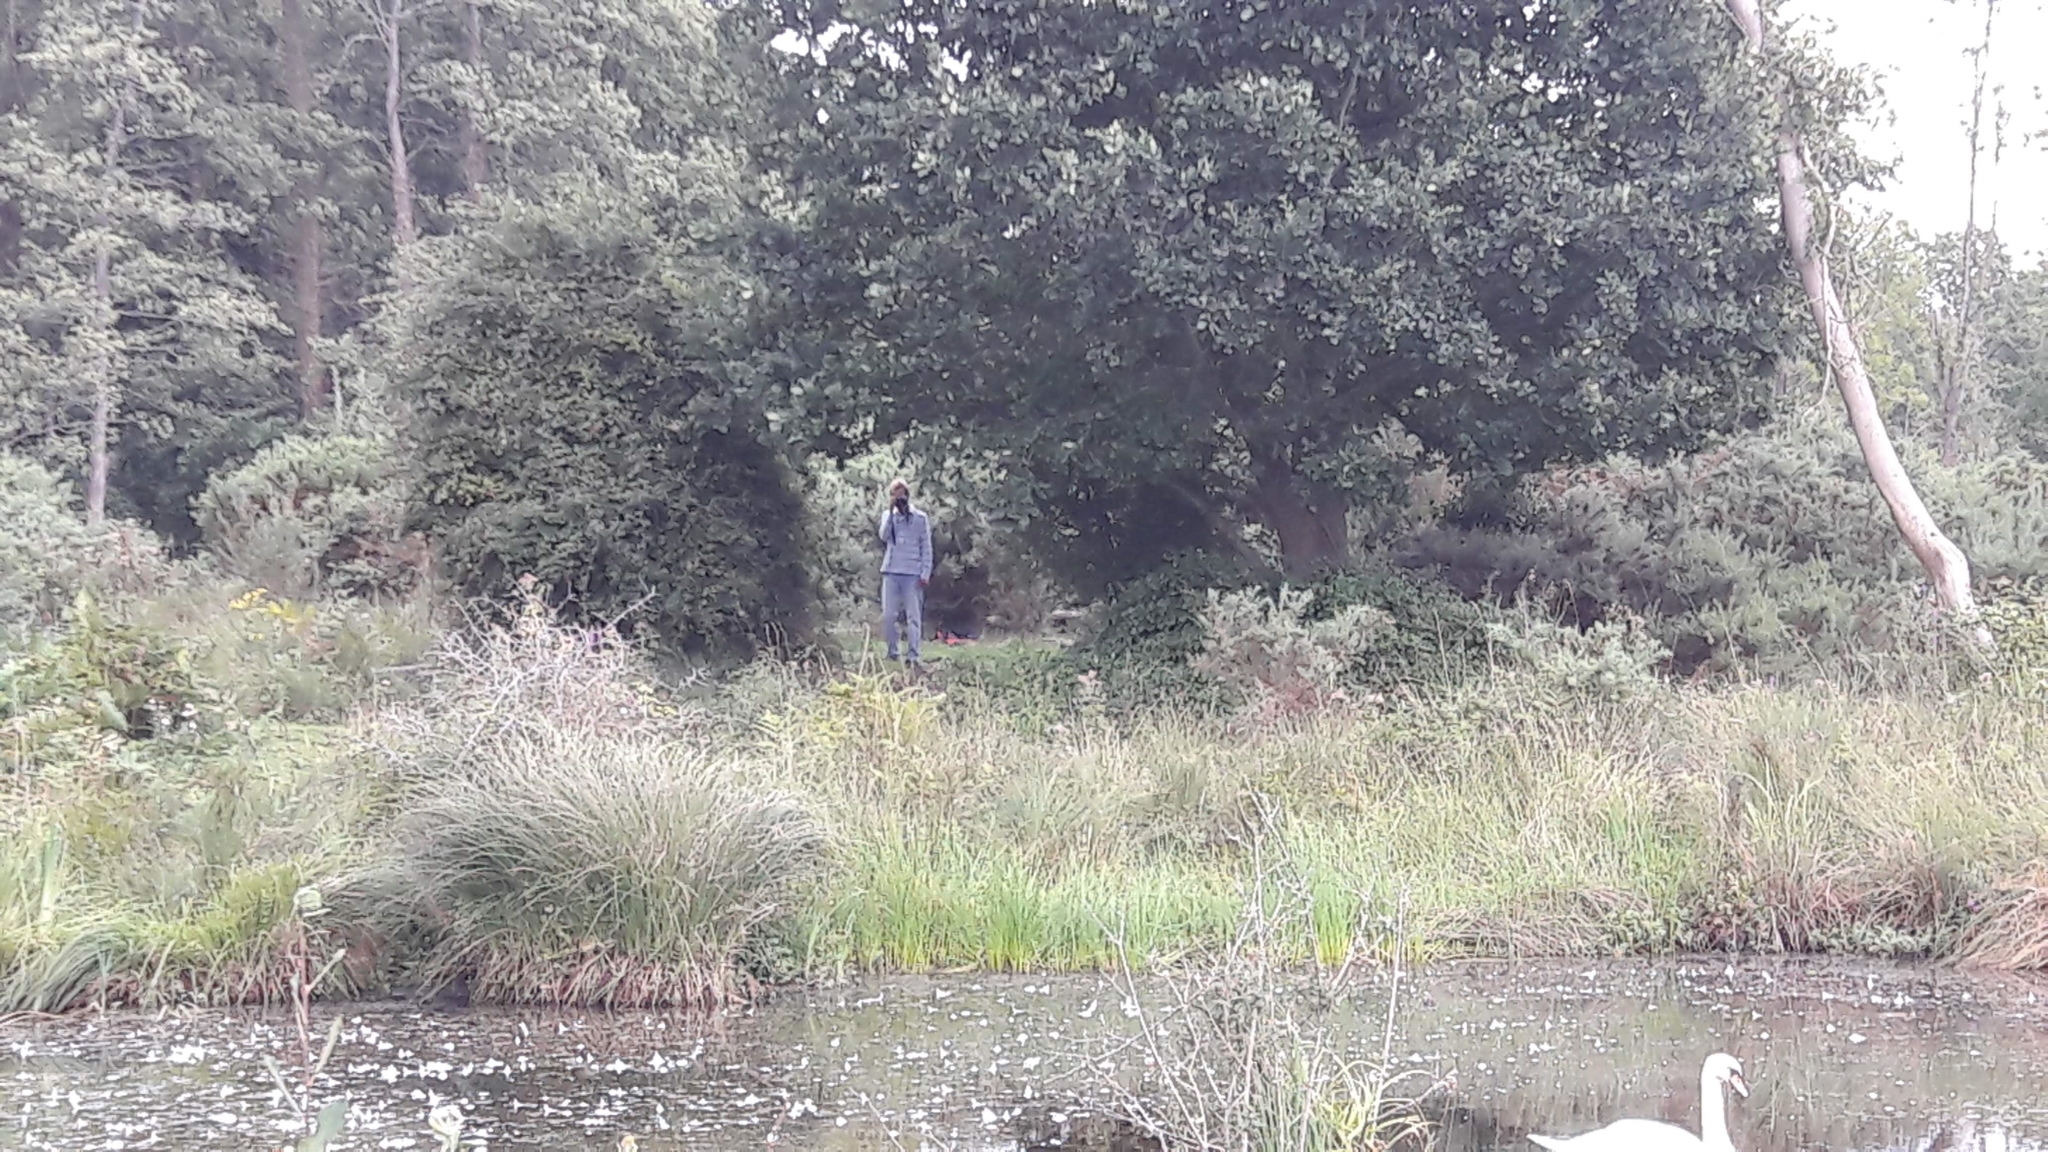 A photo from the FoTF Conservation Event - August 2018 - Gorse Removal at Hockham Hills & Holes : A volunteer takes a photo from the other side of one of the ponds